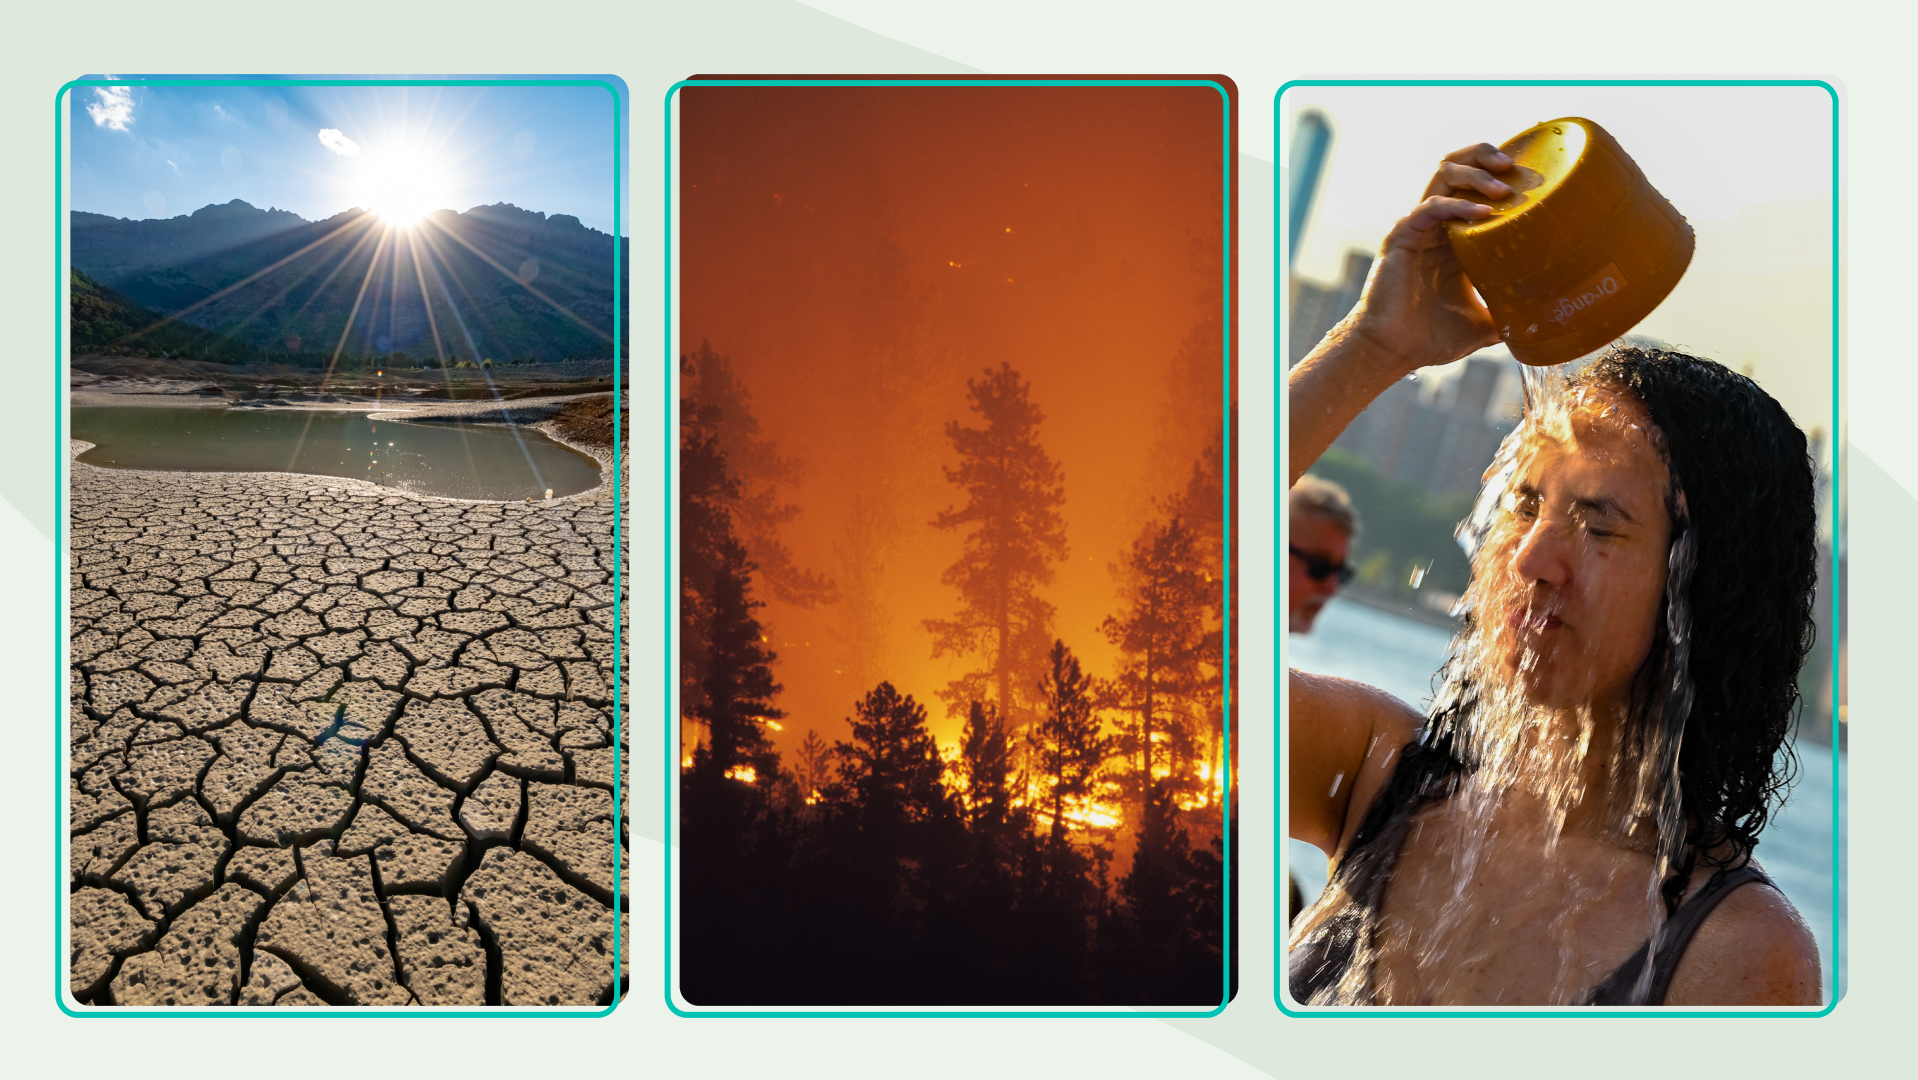 A montage of images showing a drought, wildfire, and person pouring water on themselves because of the heat